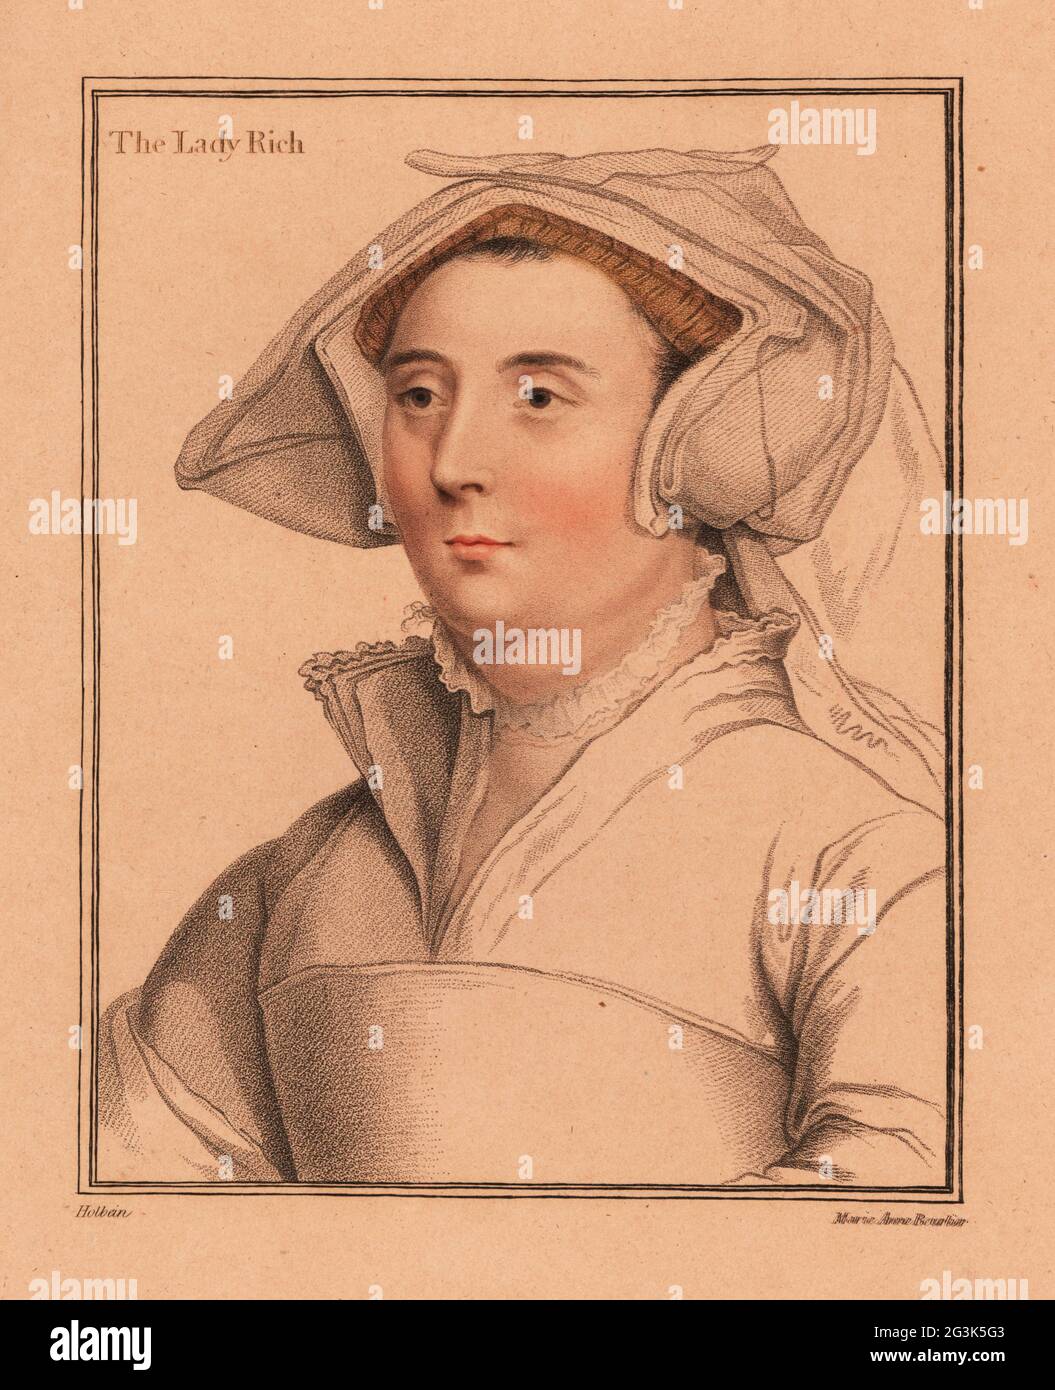 Elizabeth Jenkes, Lady Rich, wife to Sir Richard Rich, 1st Baron Rich (1496-1567), Lord Chancellor during the reign of King Edward VI. In gable hood headdress. Handcoloured copperplate stipple engraving by Marie Anne Bourlier after a portrait by Hans Holbein the Younger from Imitations of Original Drawings by Hans Holbein, John Chamberlaine, London, 1812. Stock Photo